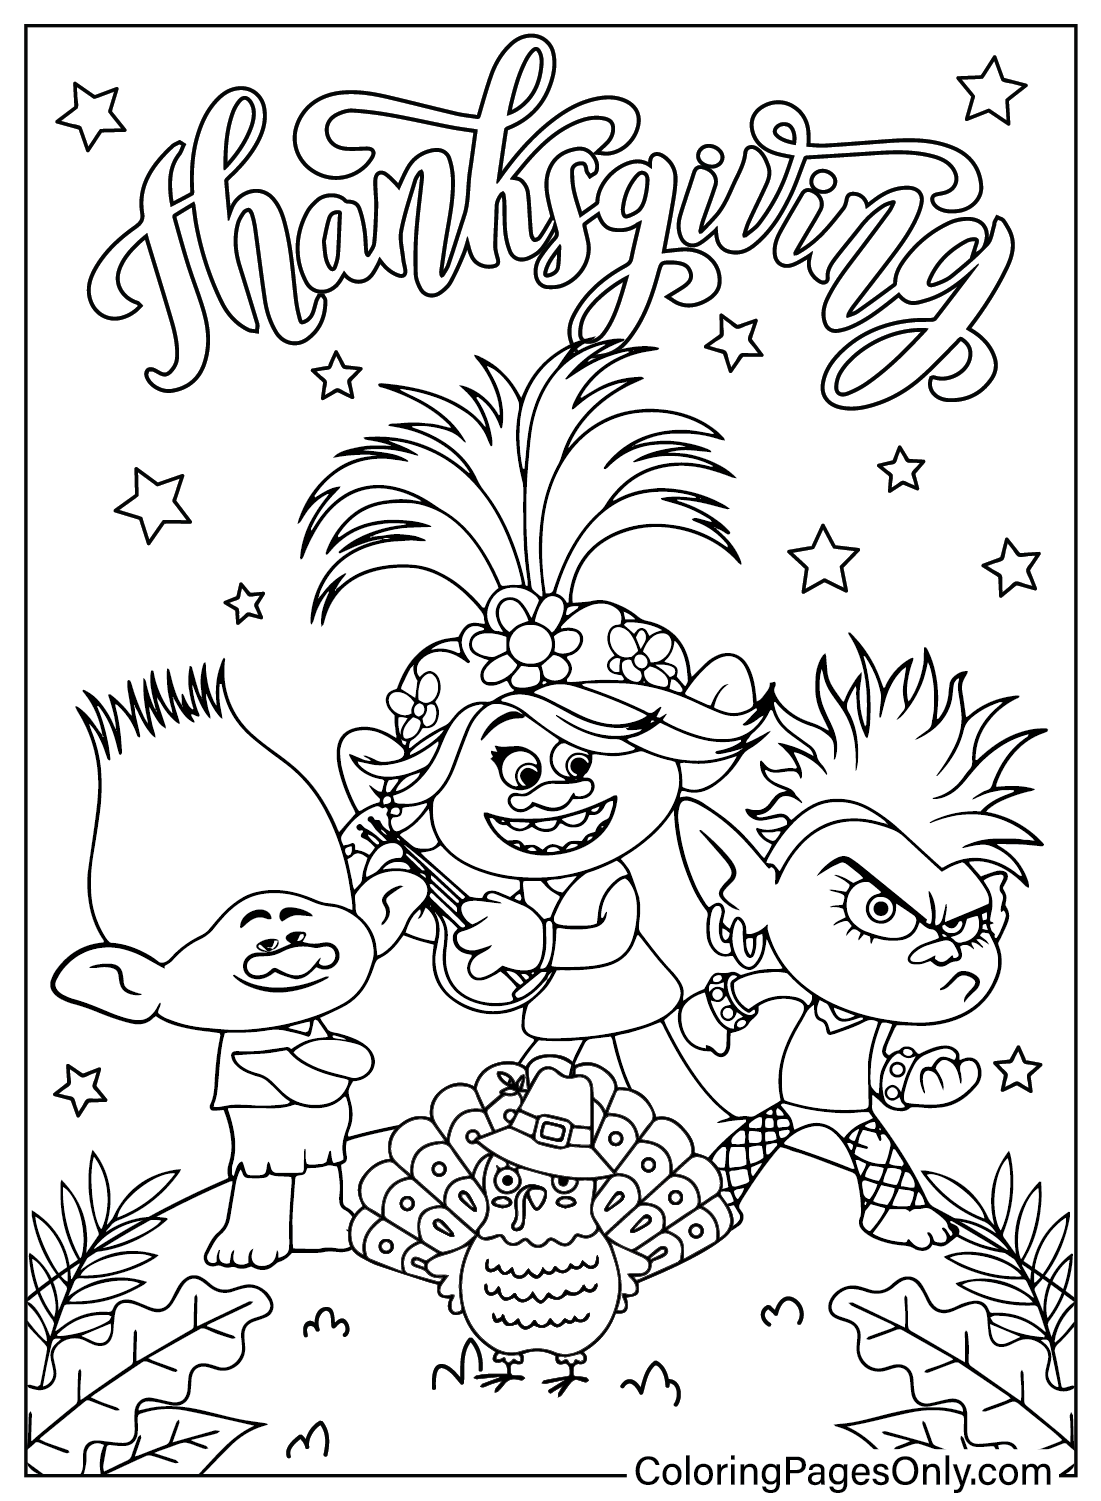 Thanksgiving Trolls Coloring Page from Thanksgiving Cartoon